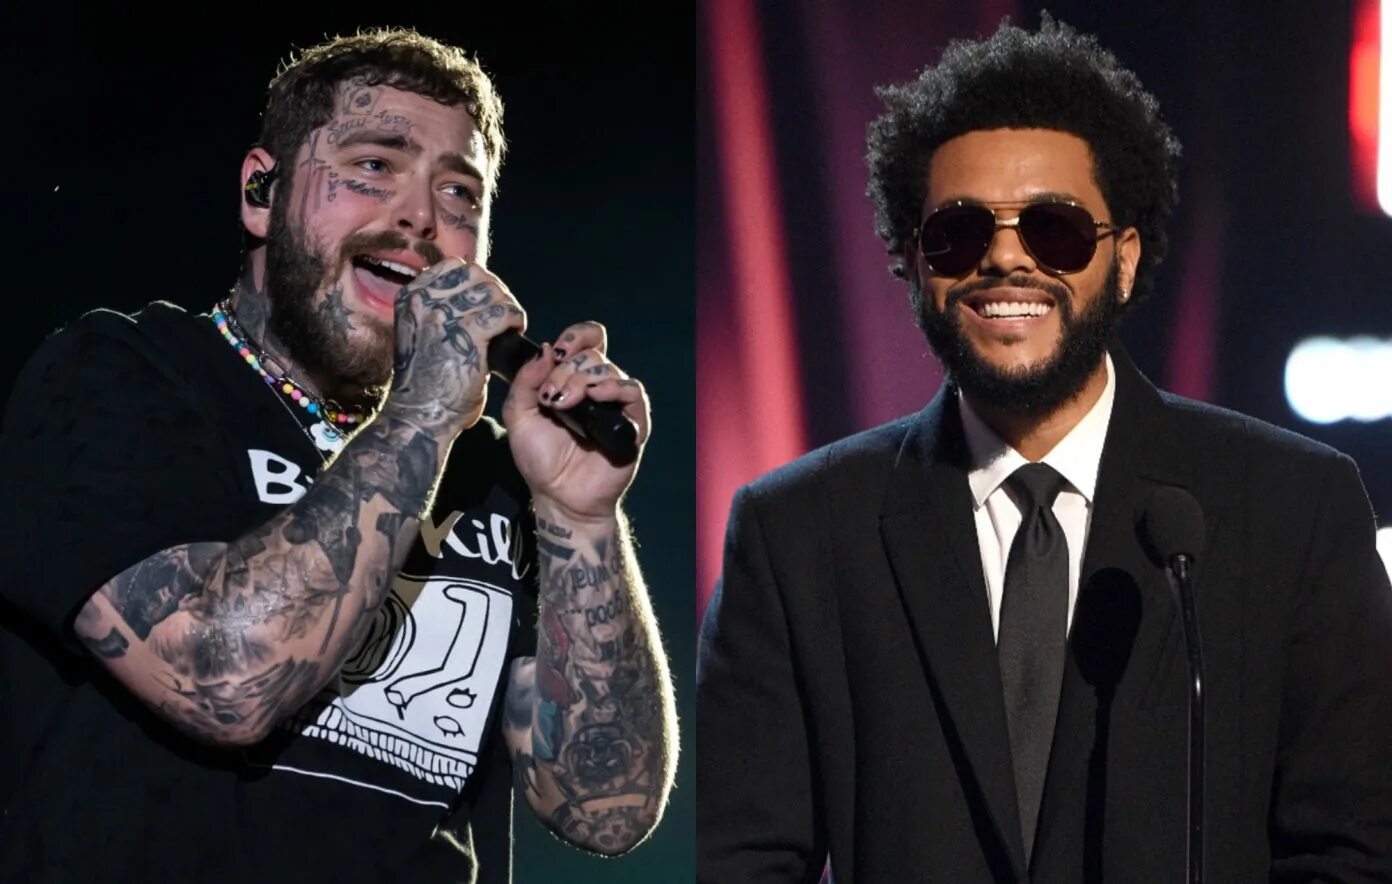 Post malone me. Post Malone the Weeknd. The Weeknd 2022. The Weeknd 202`. The Weeknd 217.